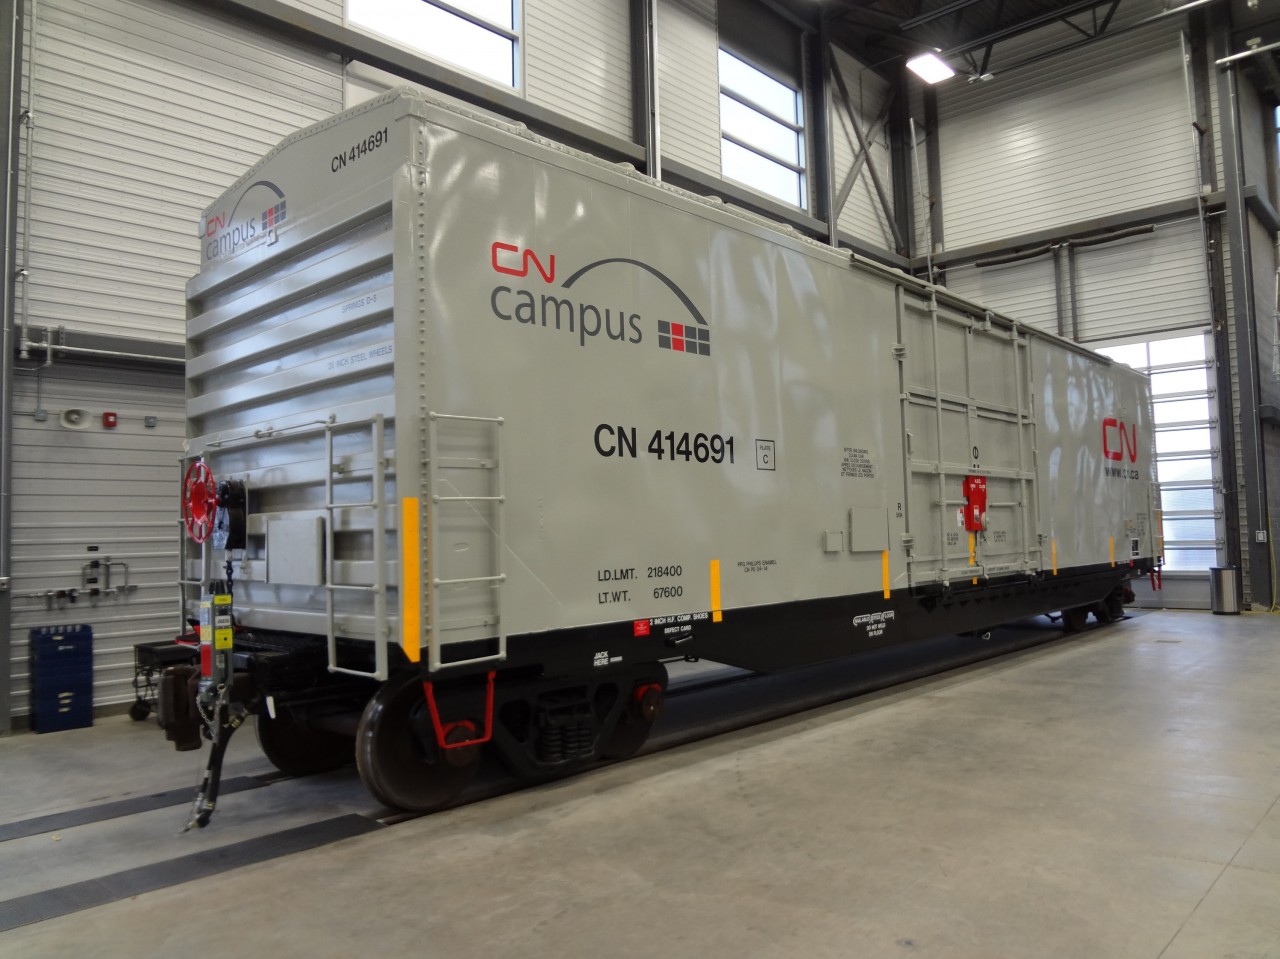 CN 414691 is tucked inside one of the training bays at CN's Campus in Transcona, MB waiting for the next generation of new employee's to begin their railroad careers, and seasoned employees to receive refresher courses. This state-of-the-art facility houses training facilities covering all aspects of railroading with both classroom and hands-on work shops.